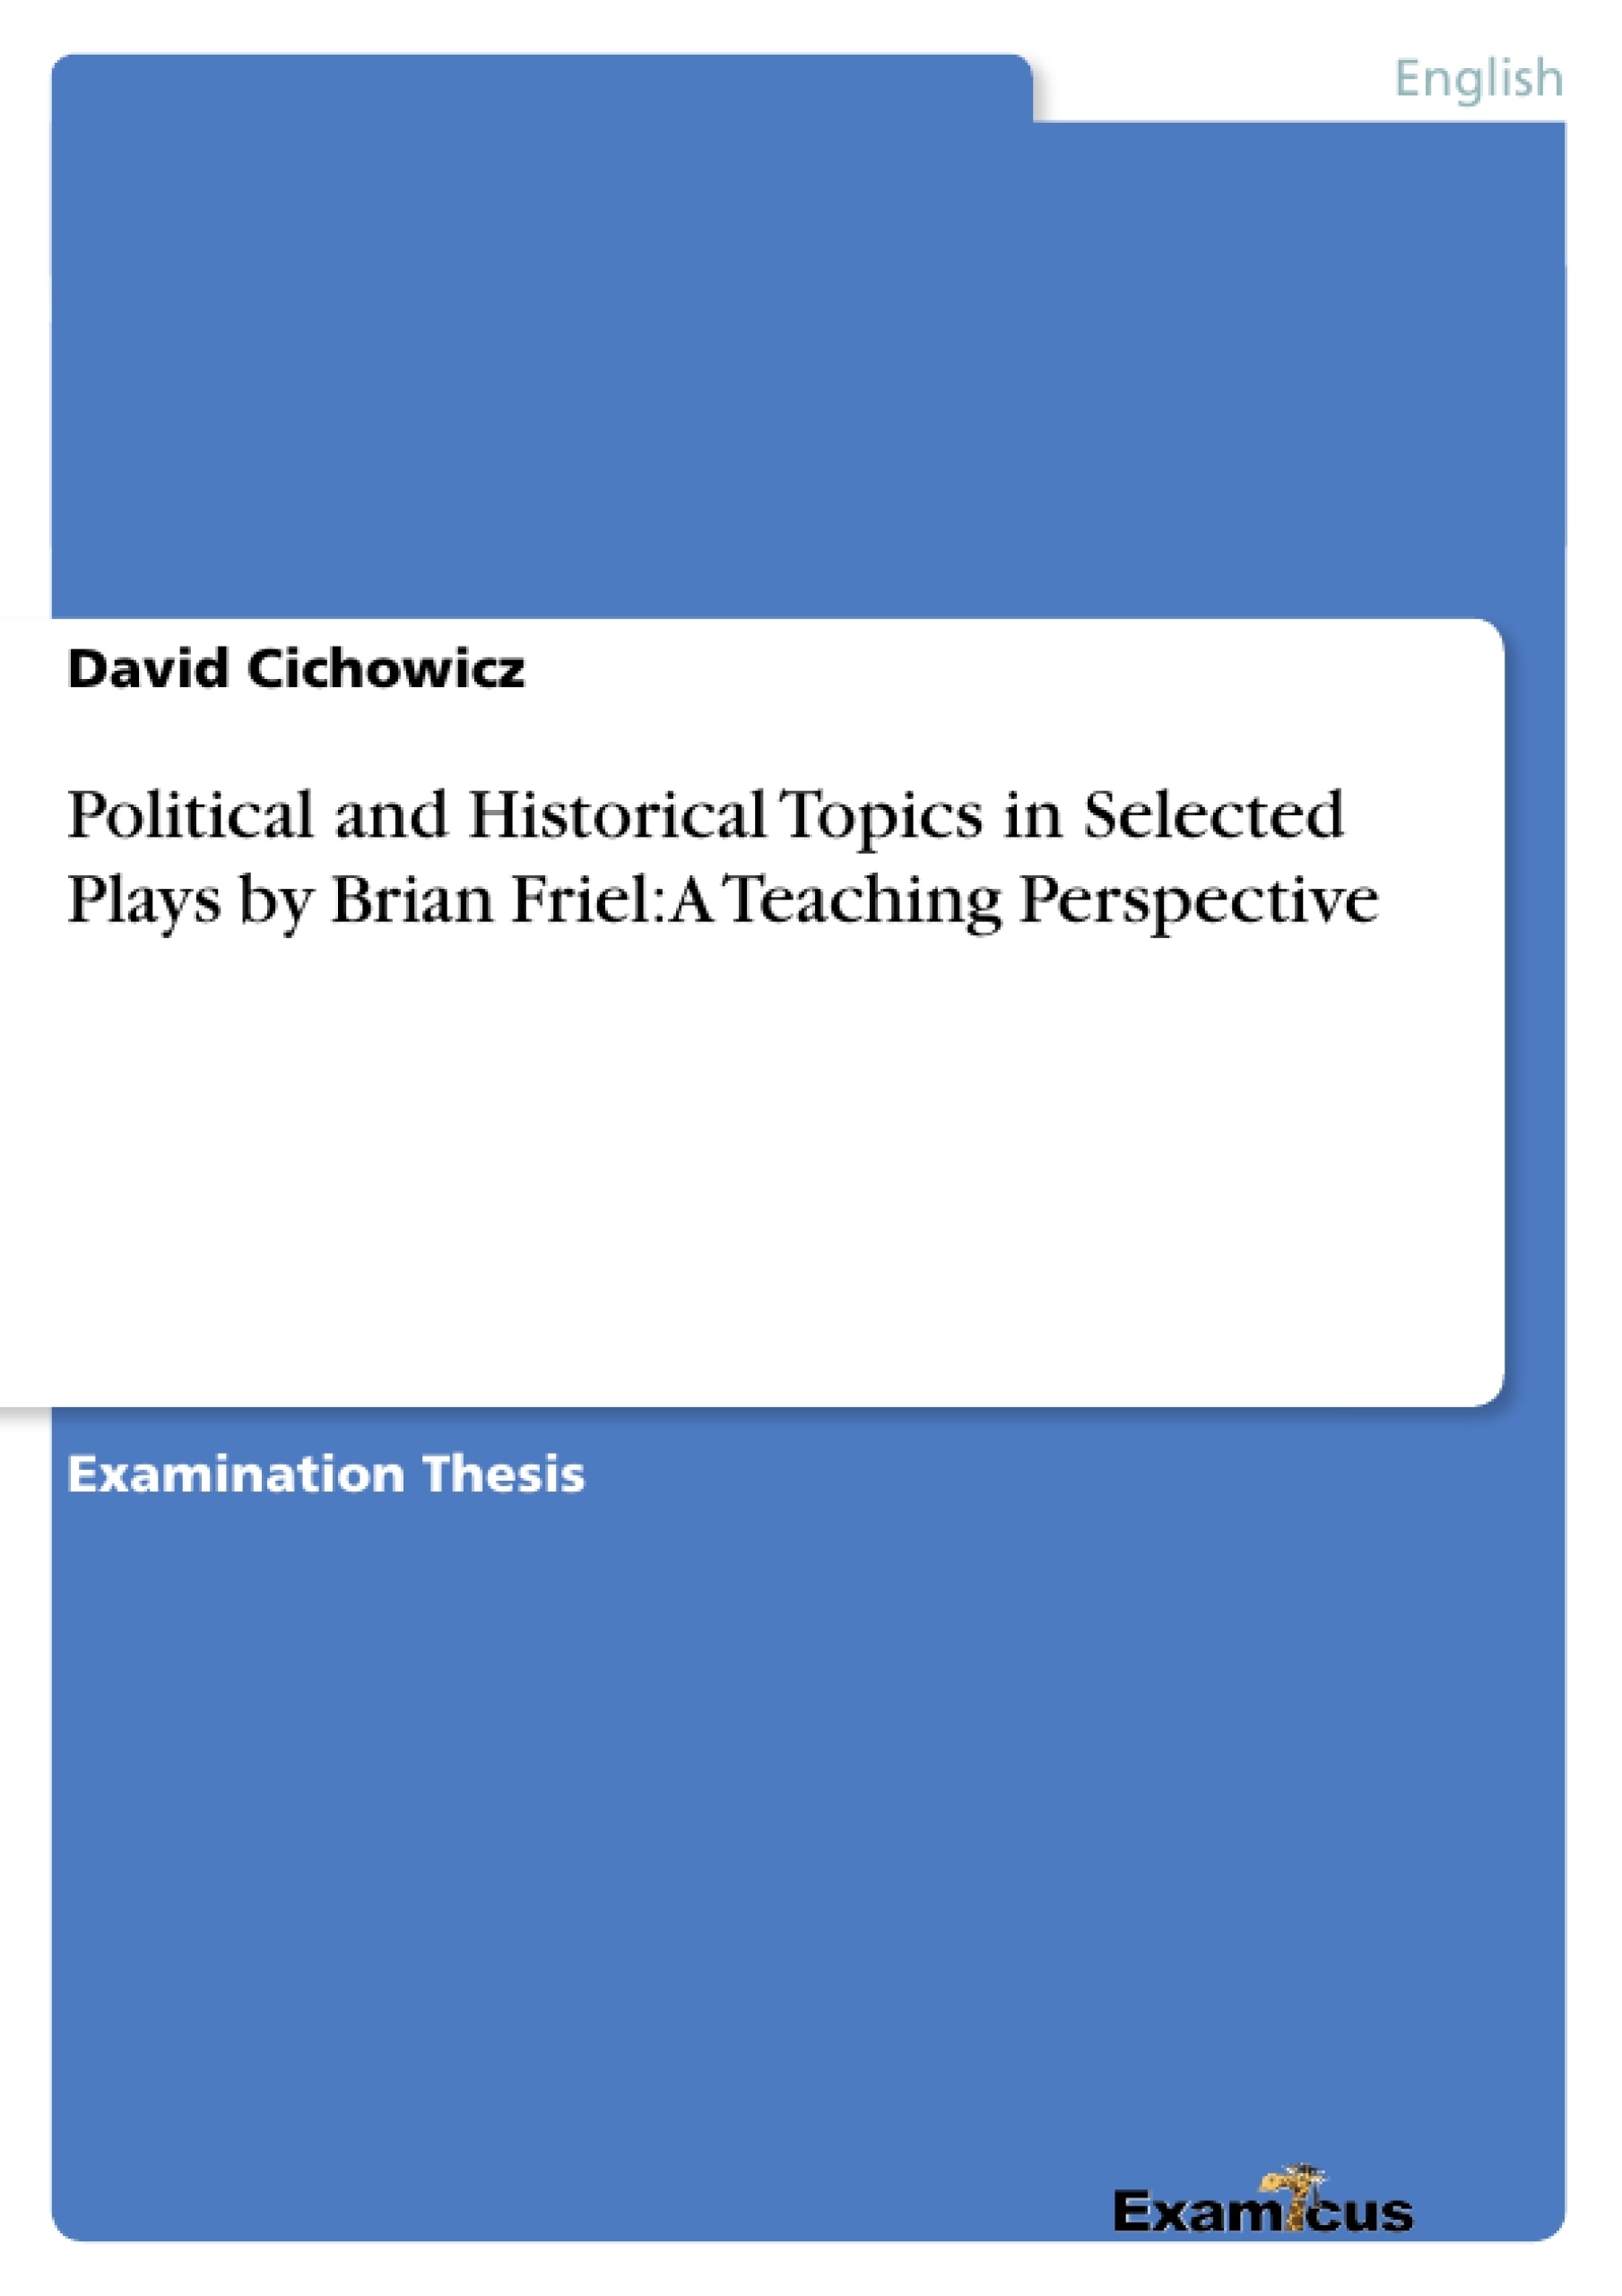 Titre: Political and Historical Topics in Selected Plays by Brian Friel: A Teaching Perspective